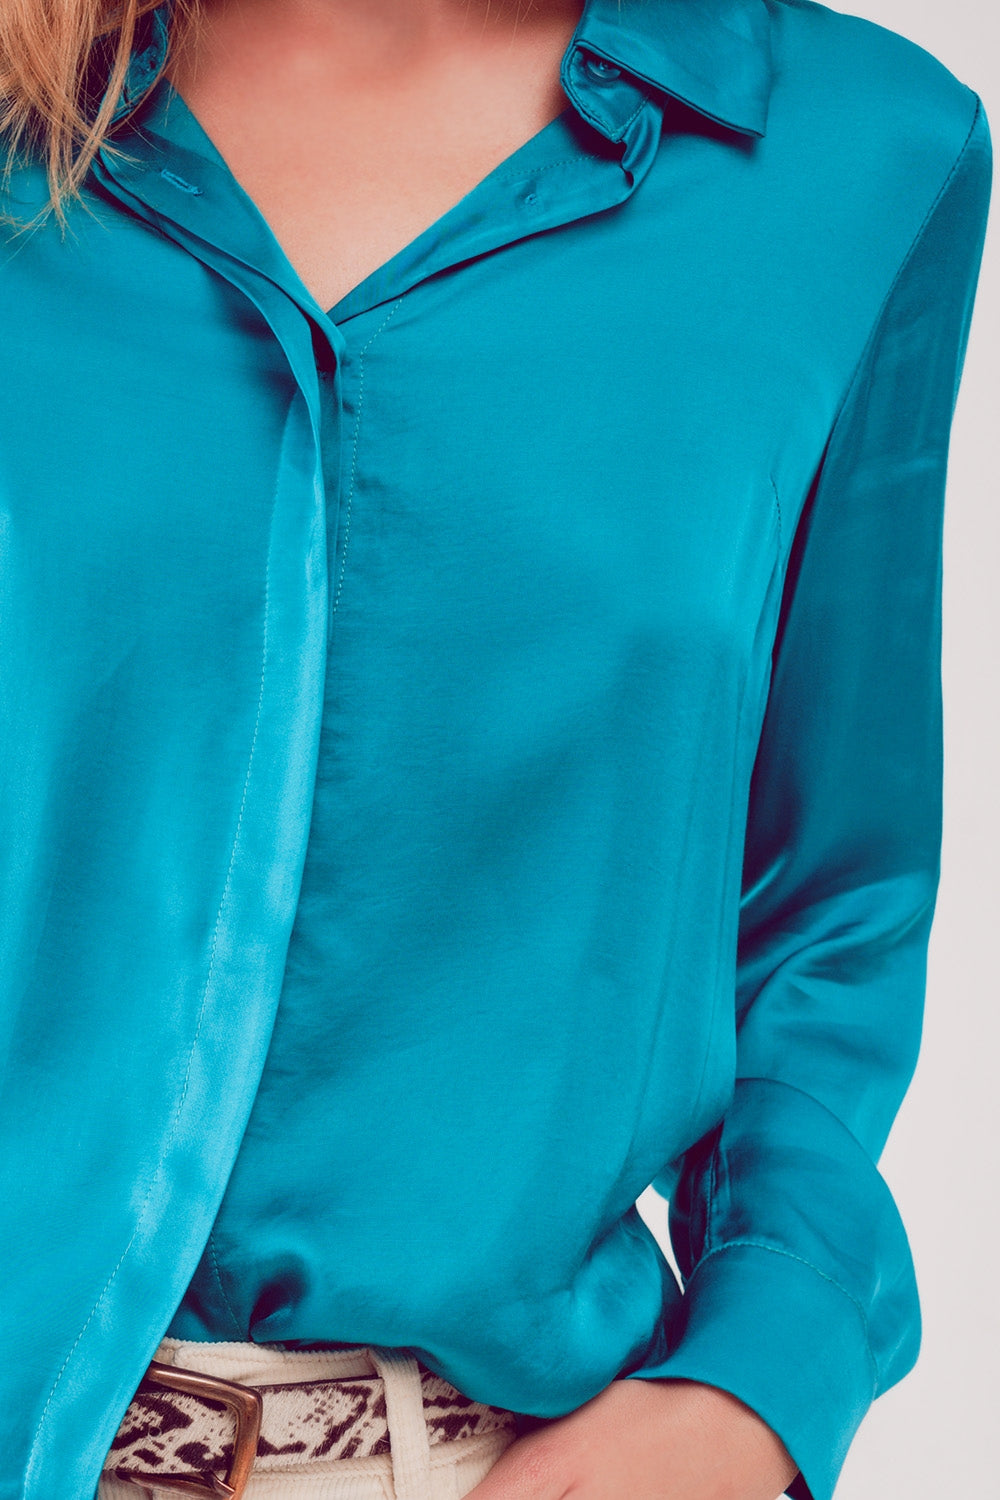 Satin shirt in turquoise